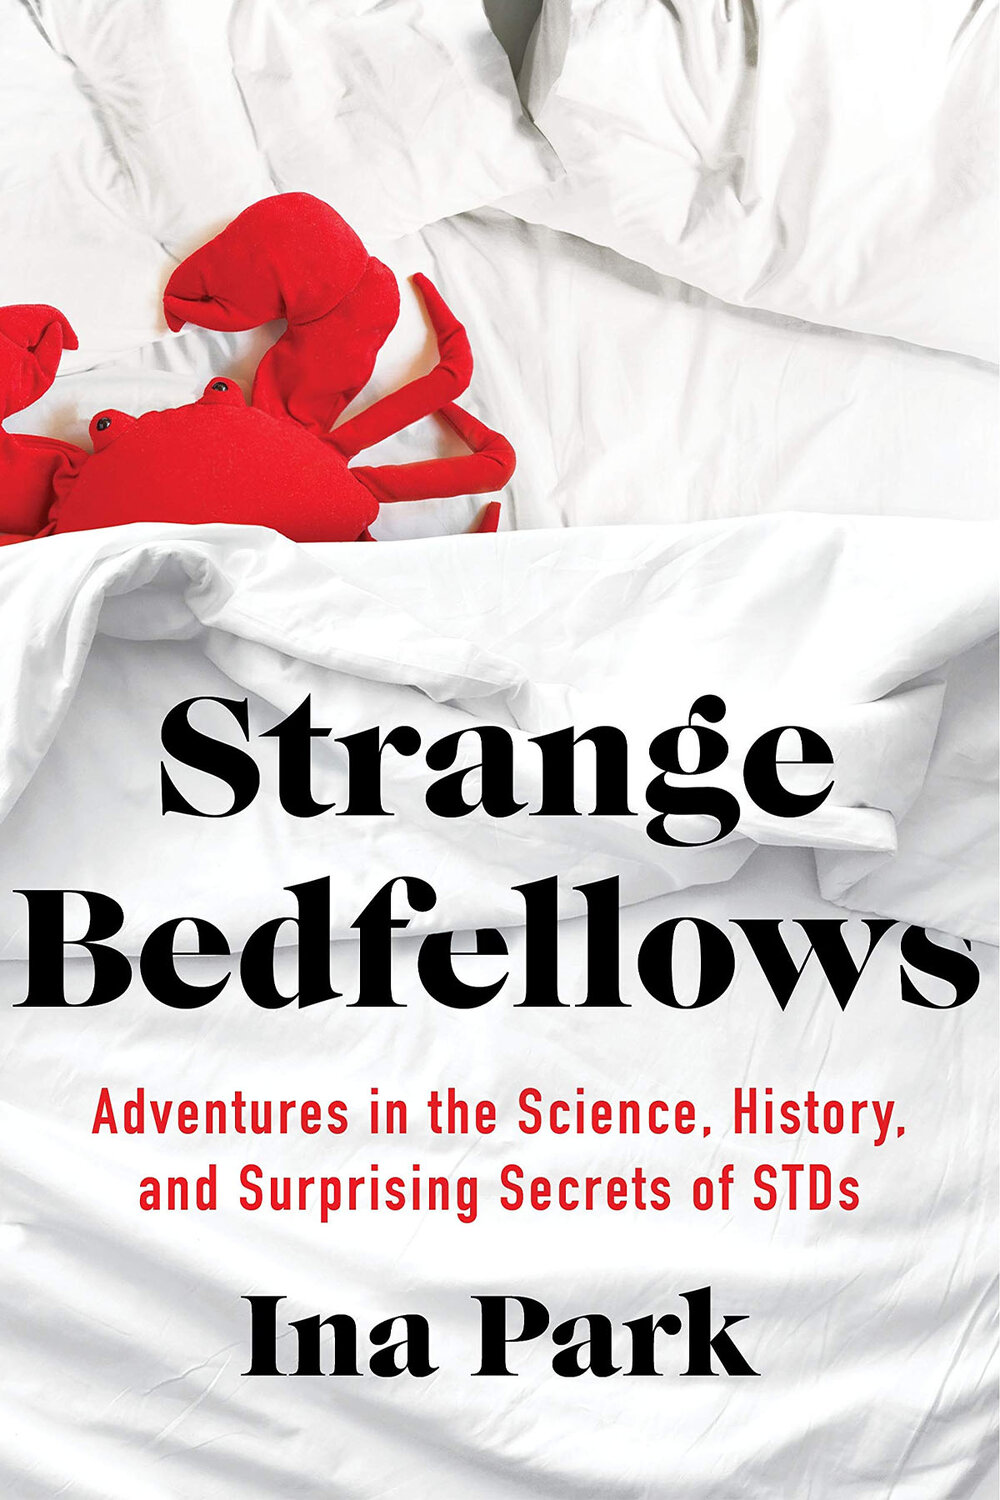 Strange Bedfellows: Adventures in Science, History, and Surprising Secrets of STDs by Ina Park